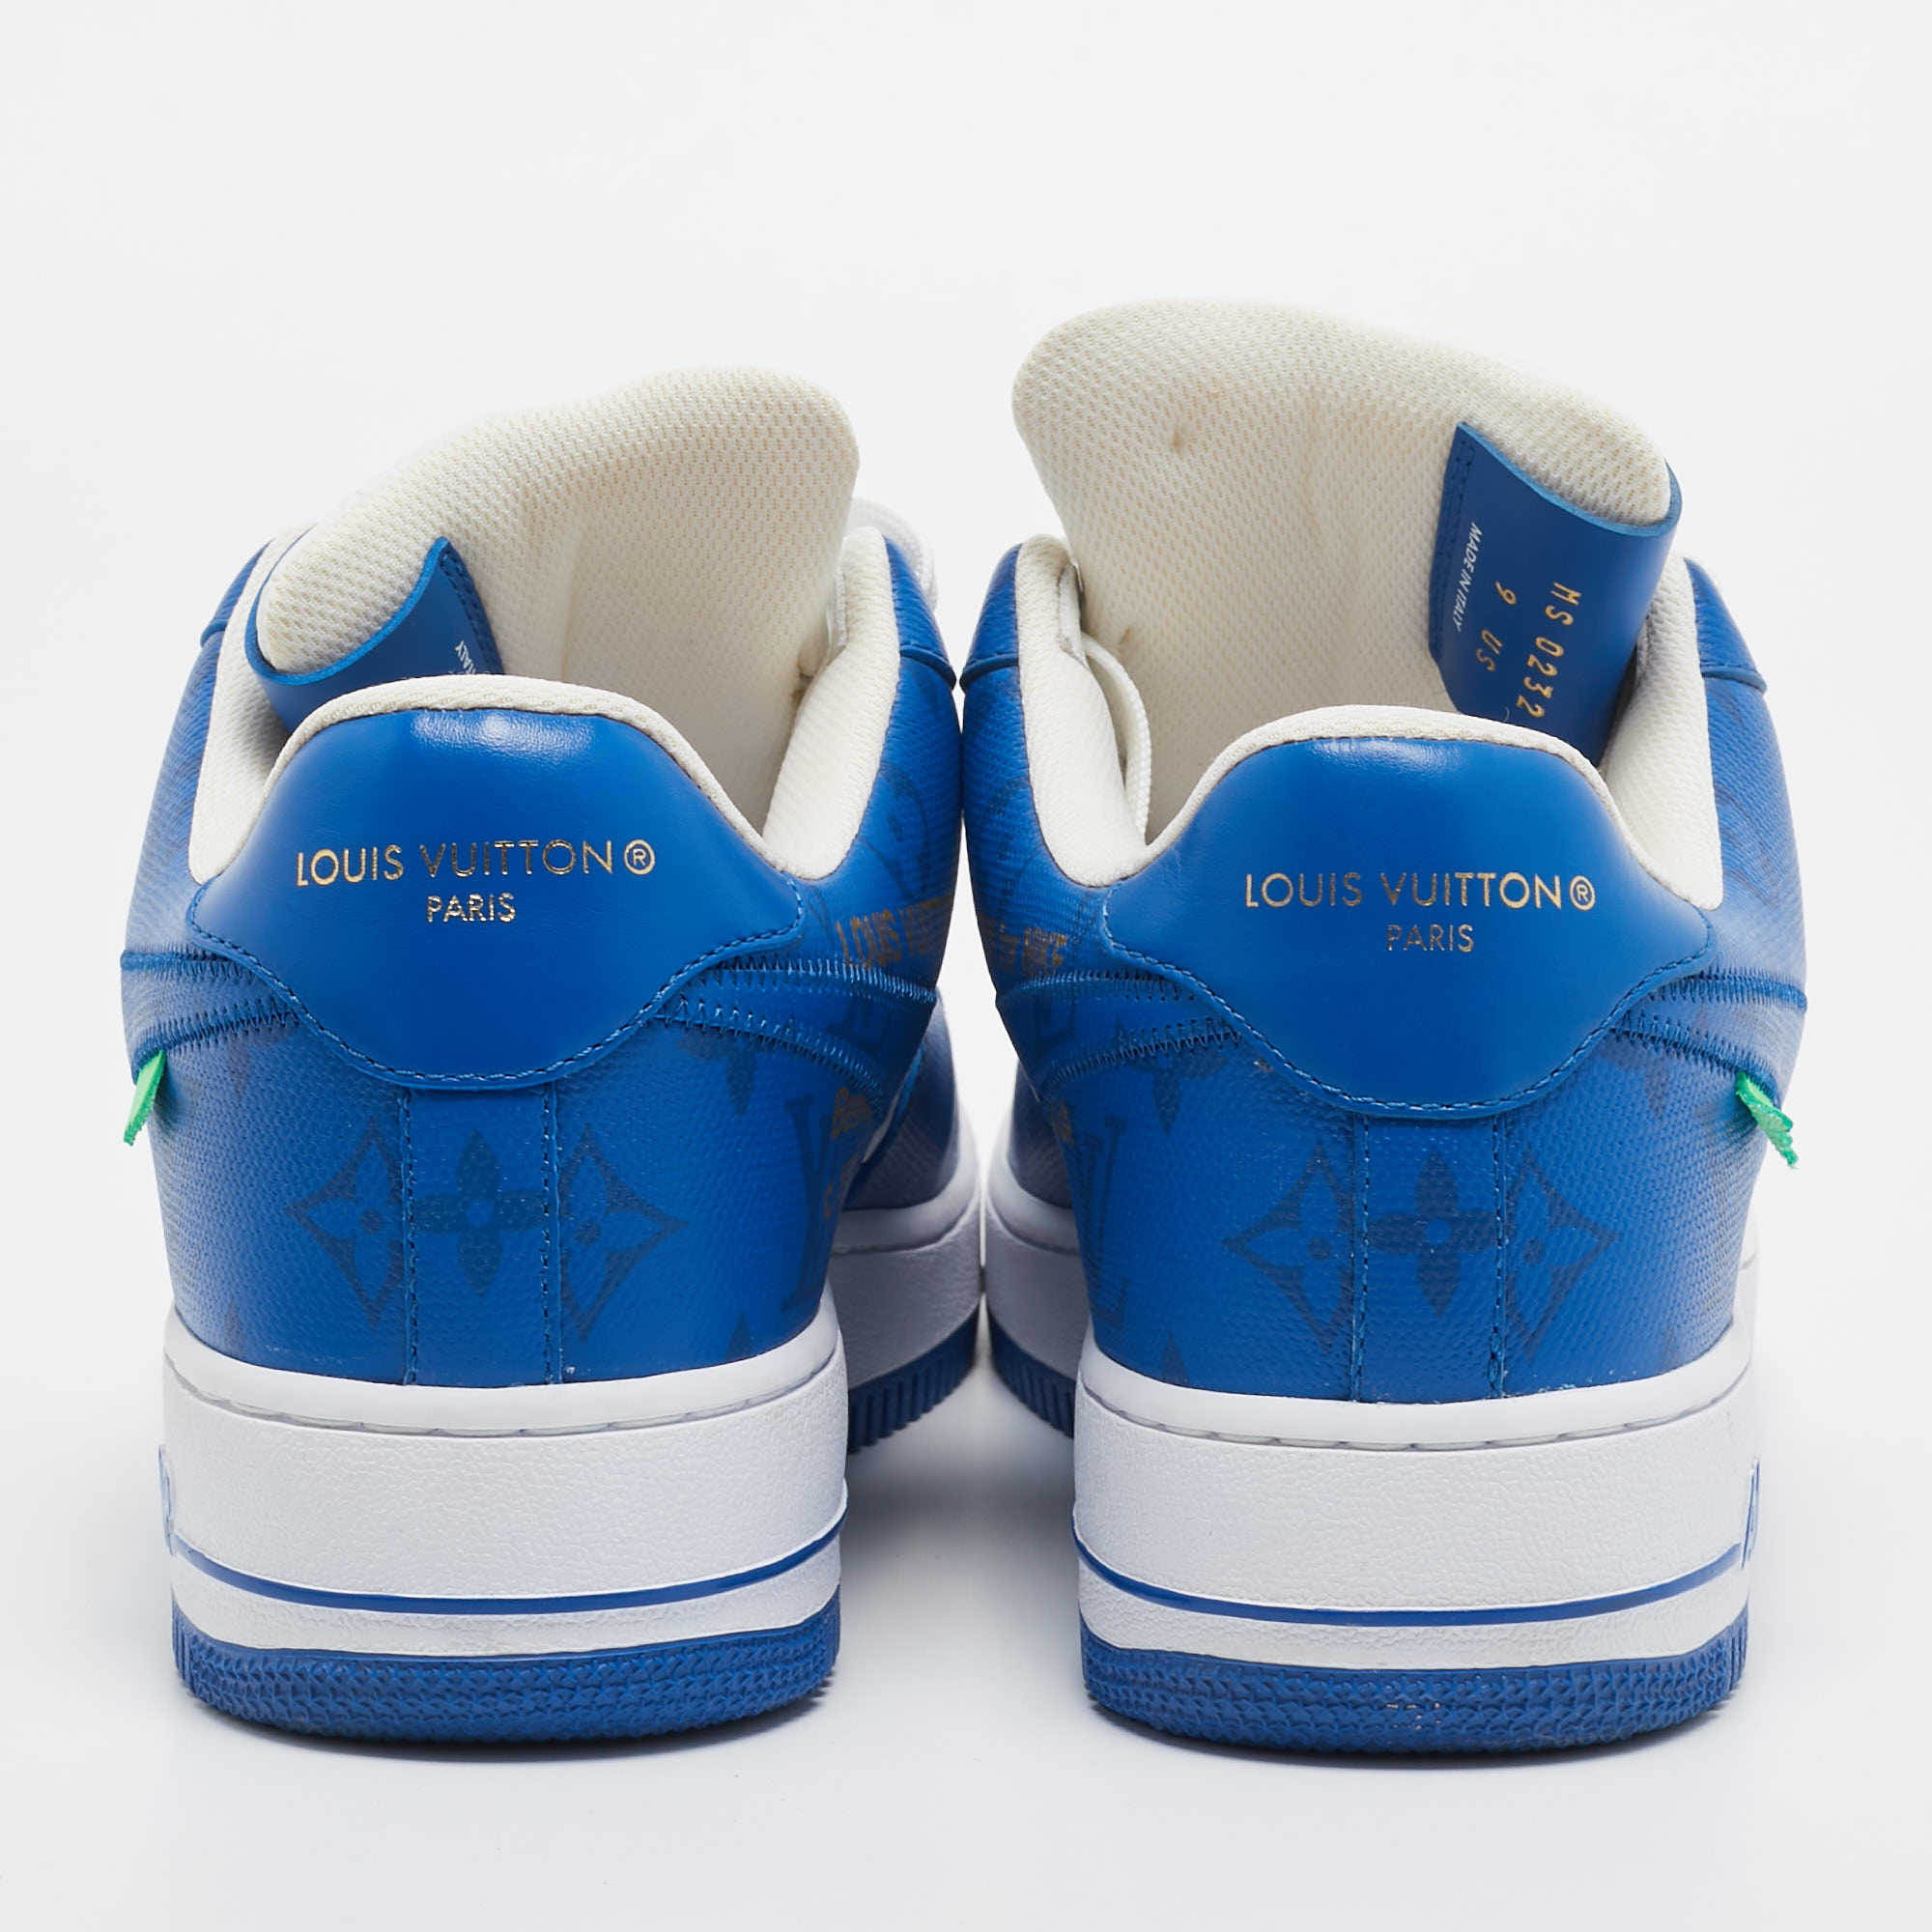 Louis Vuitton X Nike Blue/White Leather Nike Air Force 1 Low Top Sneakers Size 42